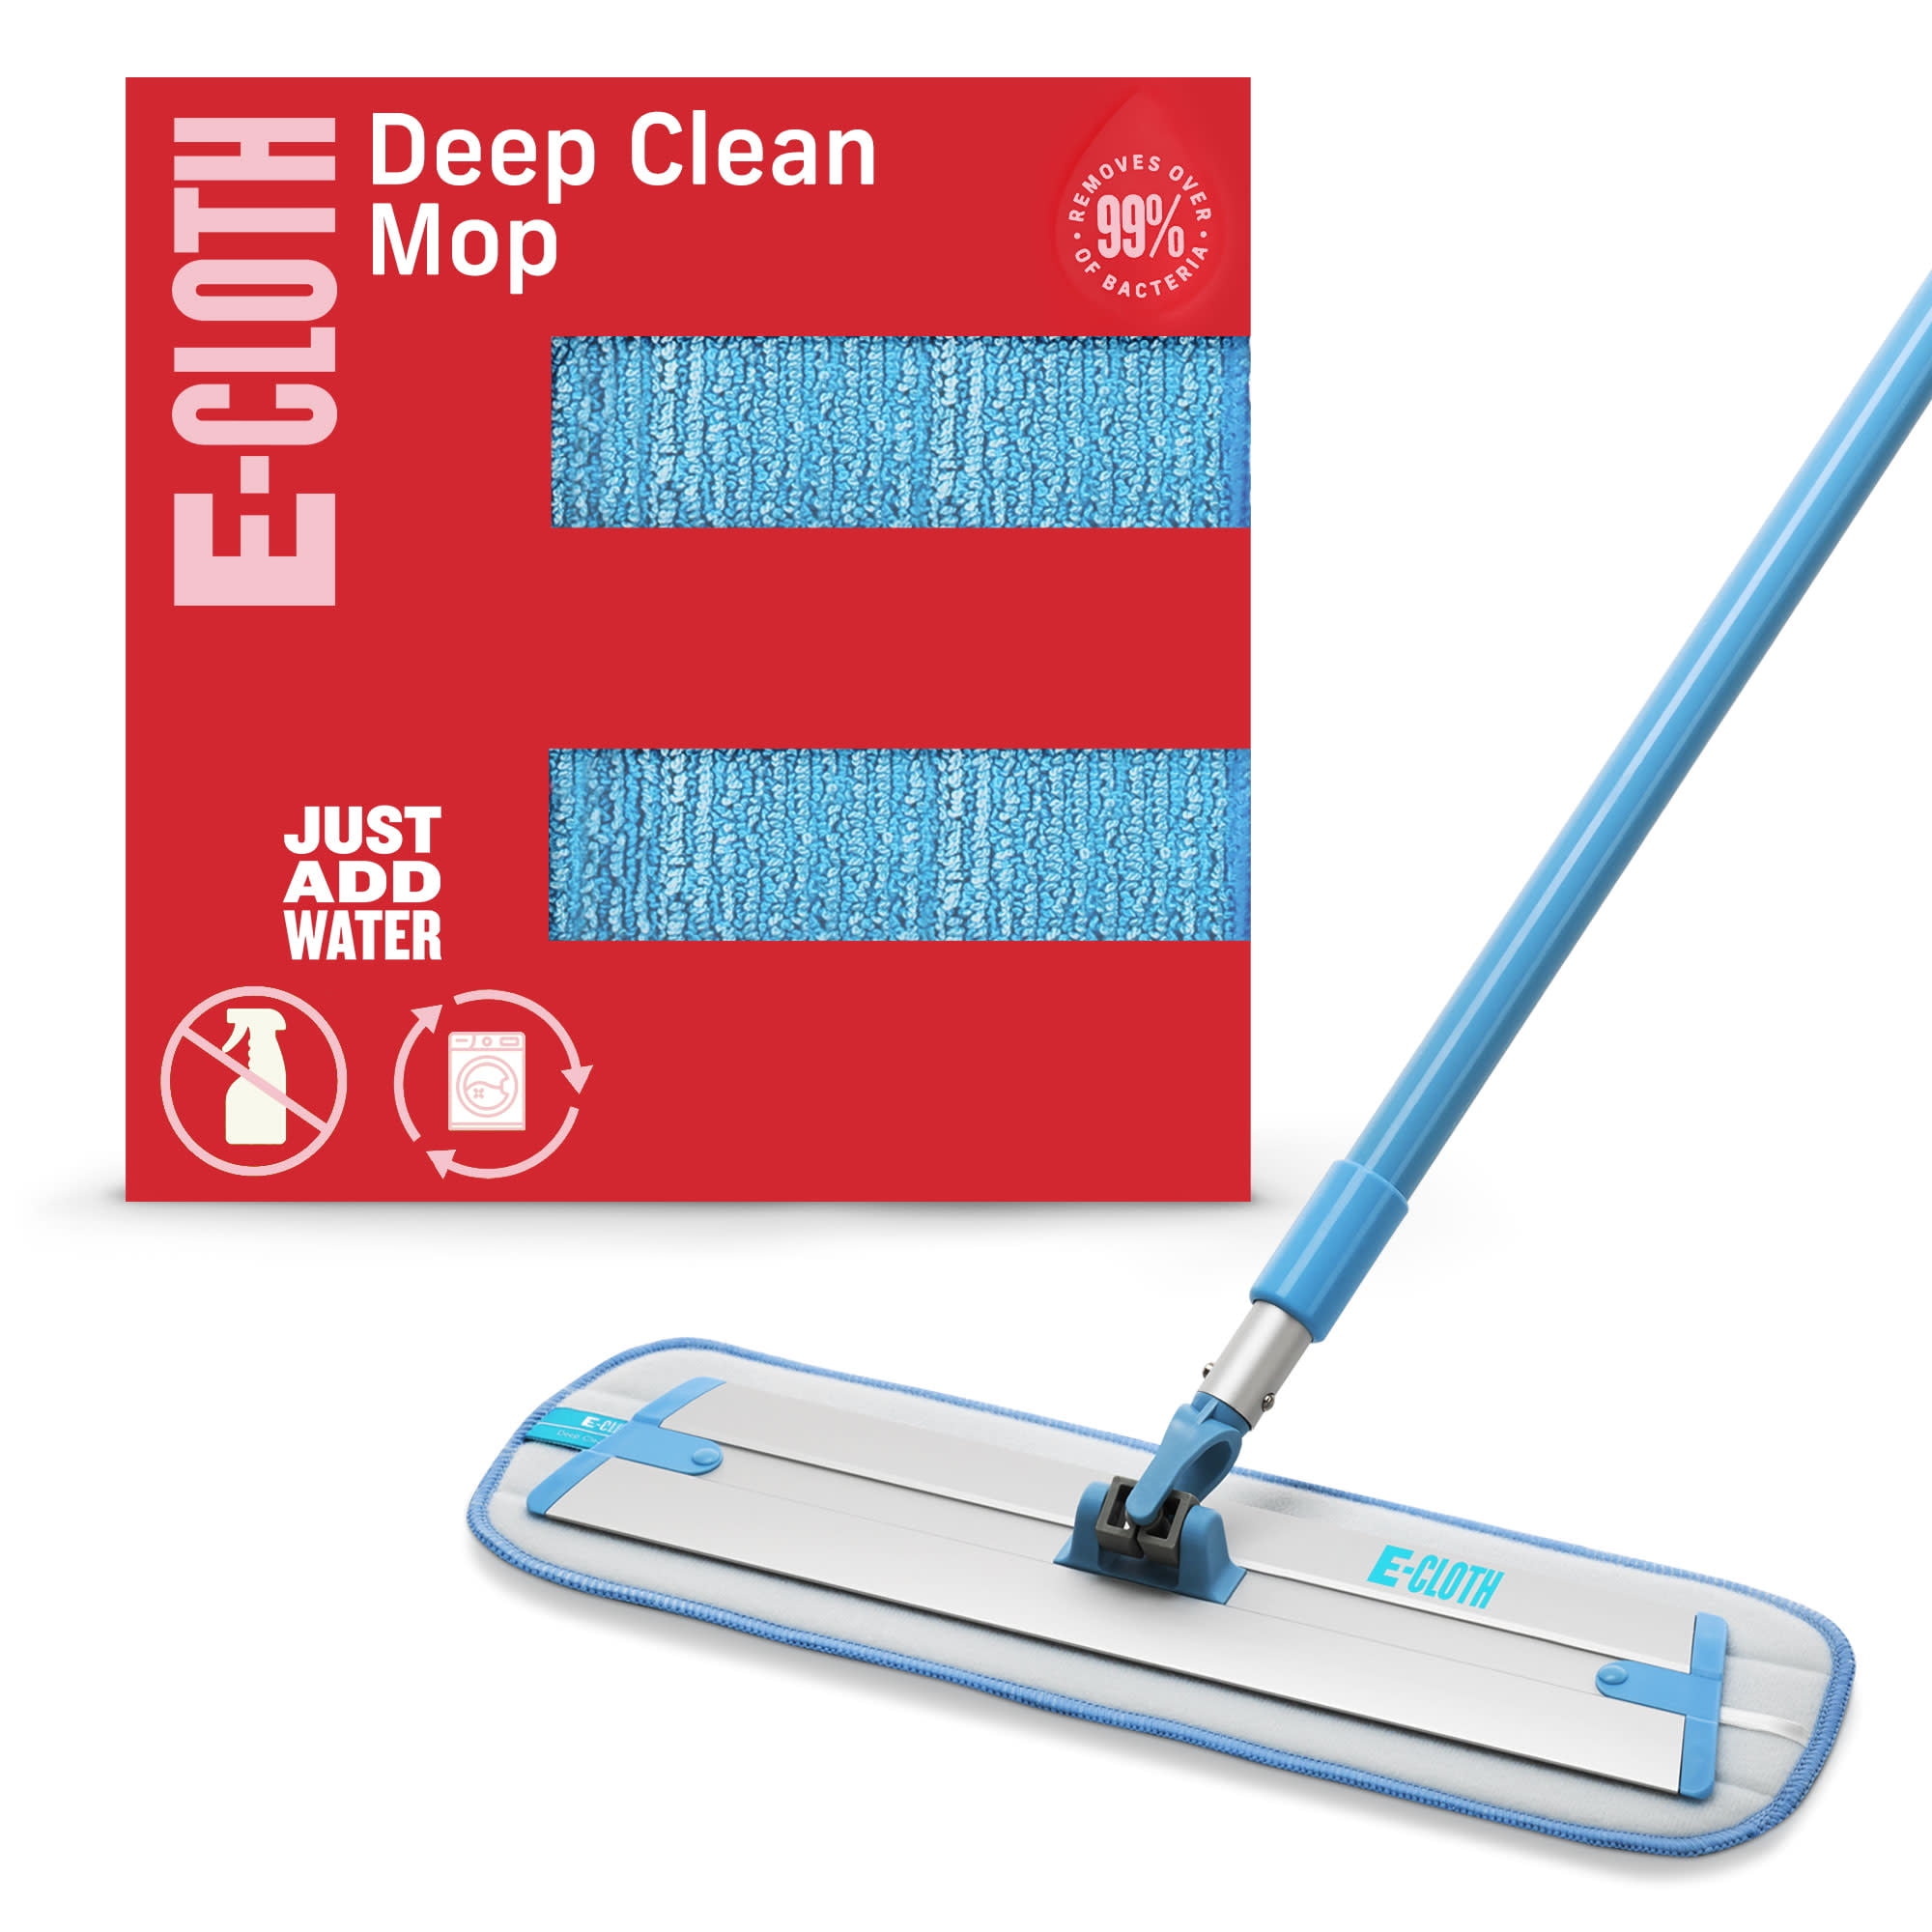 Splash Spotless - Deep Clean Your Dirty Washing Machine with Ease!